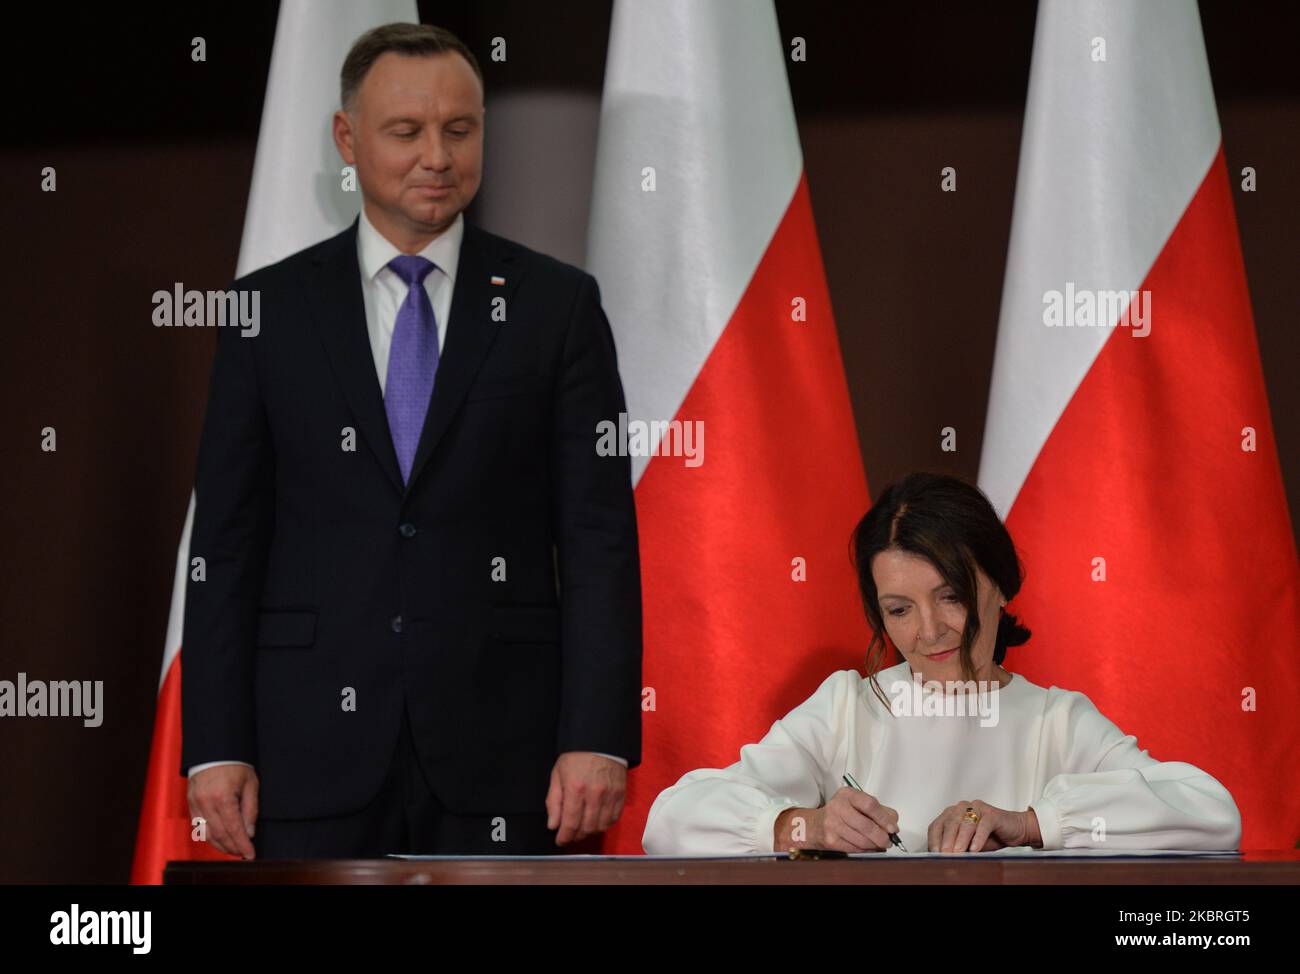 Andrzej Duda, the current Polish President and candidate for the presidential election 2020 and Teresa Halas, sign the program agreement with NSZZ 'S' Individual Farmers trade union, during his visit in Wierzchoslawice. President Duda laid a wreath at Wincenty Witos tumb, a Polish politician and leader of the Polish People's Party (PSL), who served three times as the Prime Minister of Poland in the 1920s. On Monday, June 22, 2020, in Wierzchoslawice, Lesser Poland Voivodeship, Poland. (Photo by Artur Widak/NurPhoto) Stock Photo